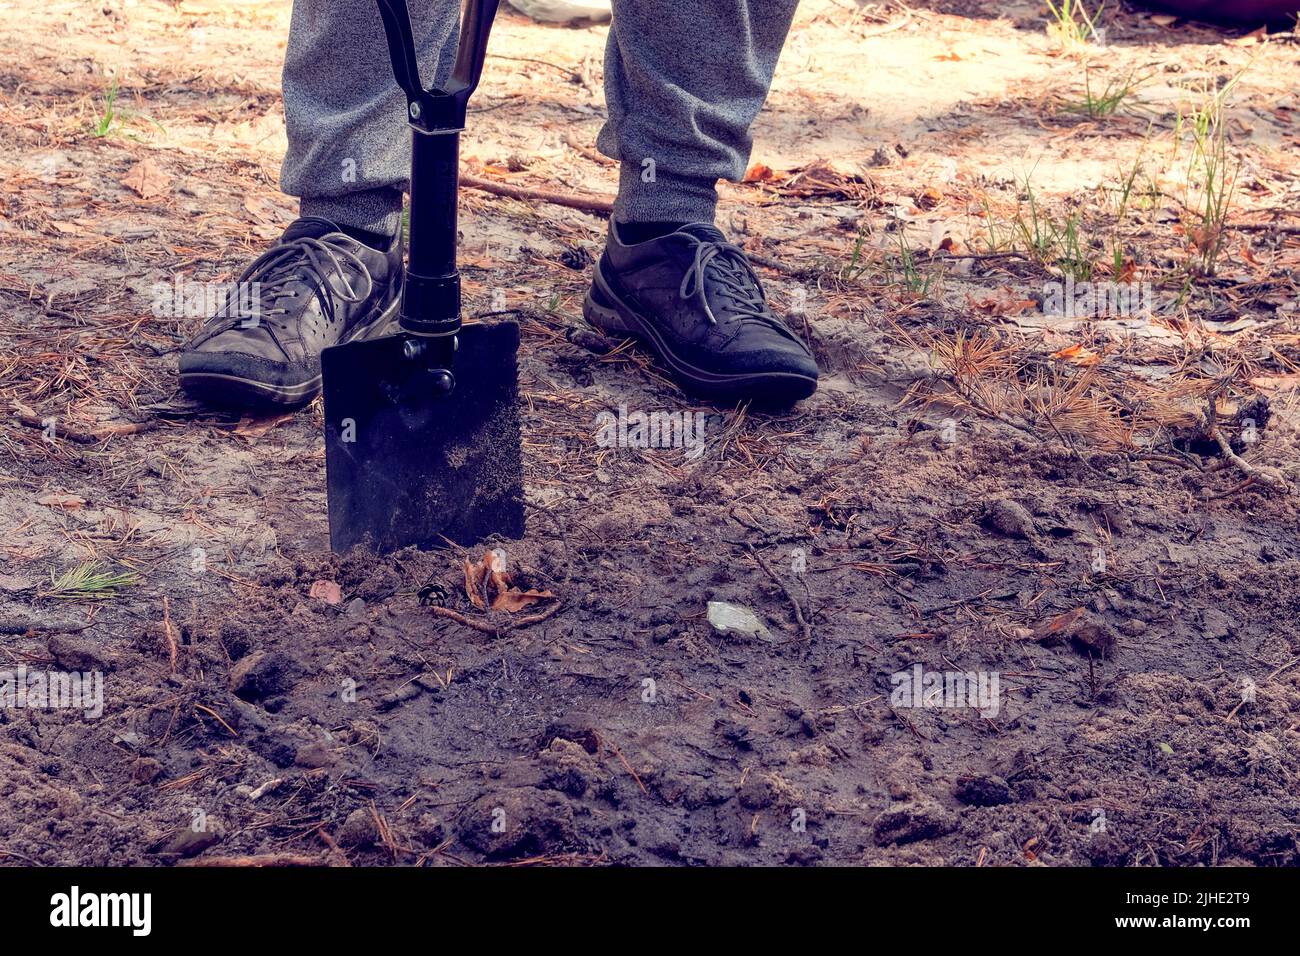 Black shovel in human hands. Man digs soil with a shovel in the forest. Stock Photo